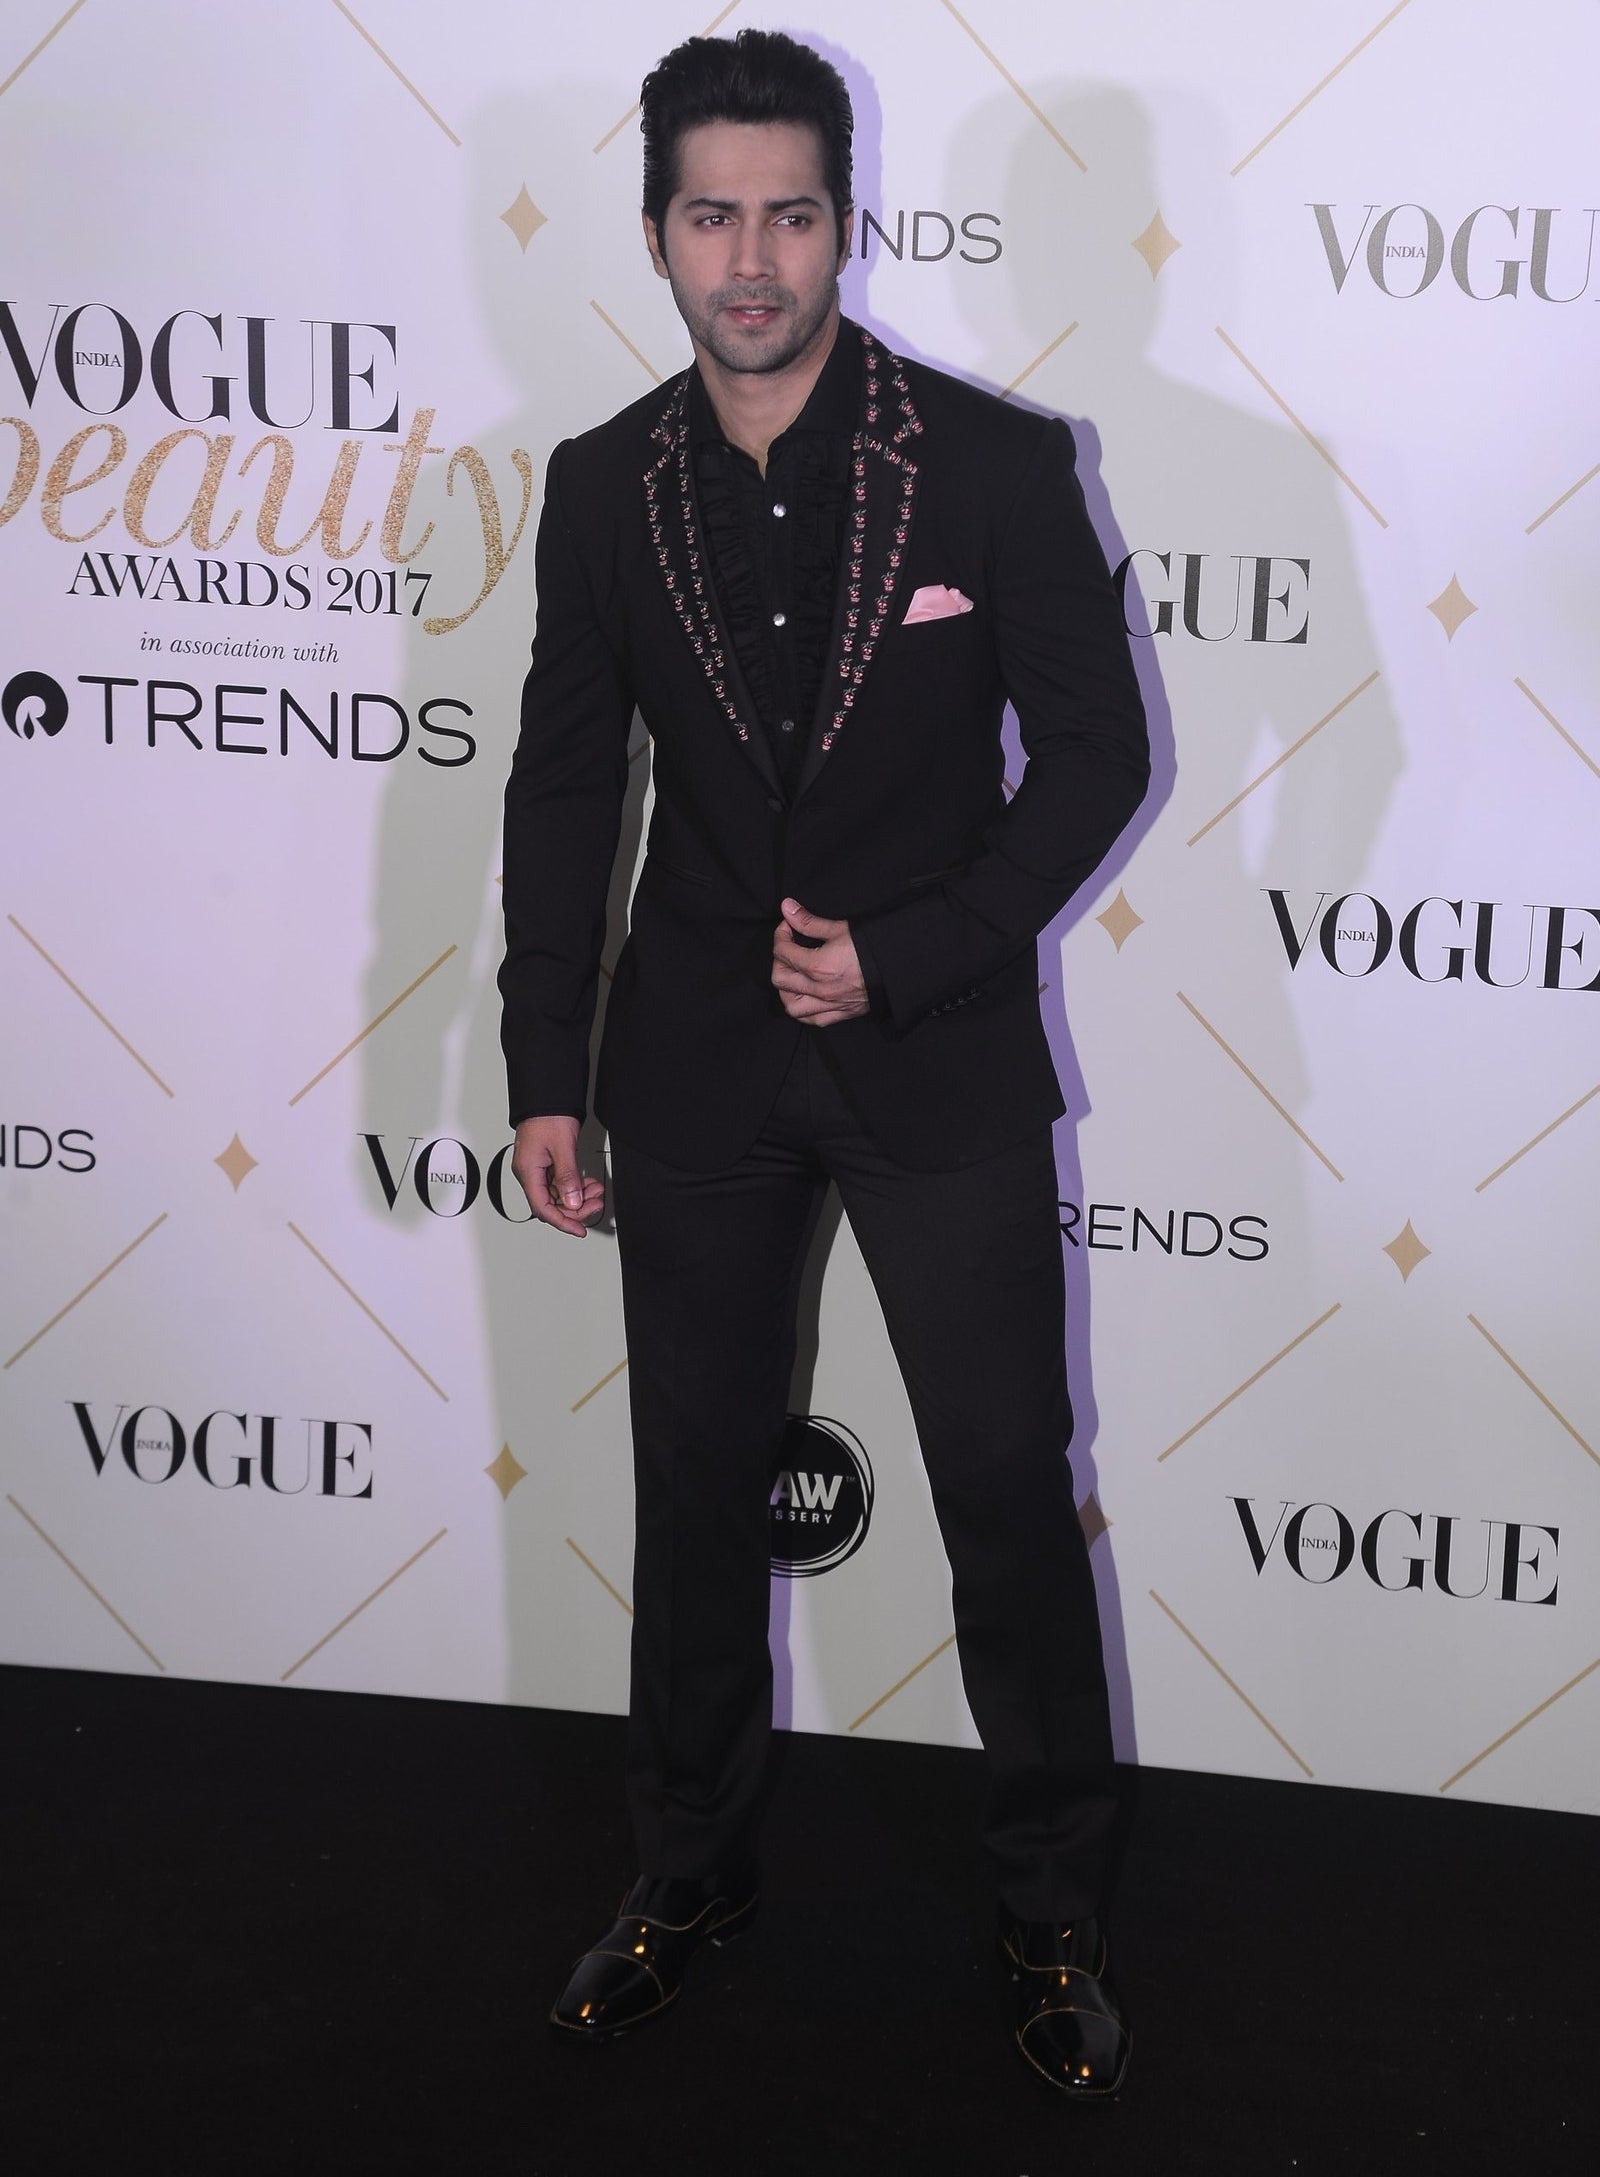 24 Of The Best-Dressed Bollywood Stars At The 2017 Vogue Beauty Awards